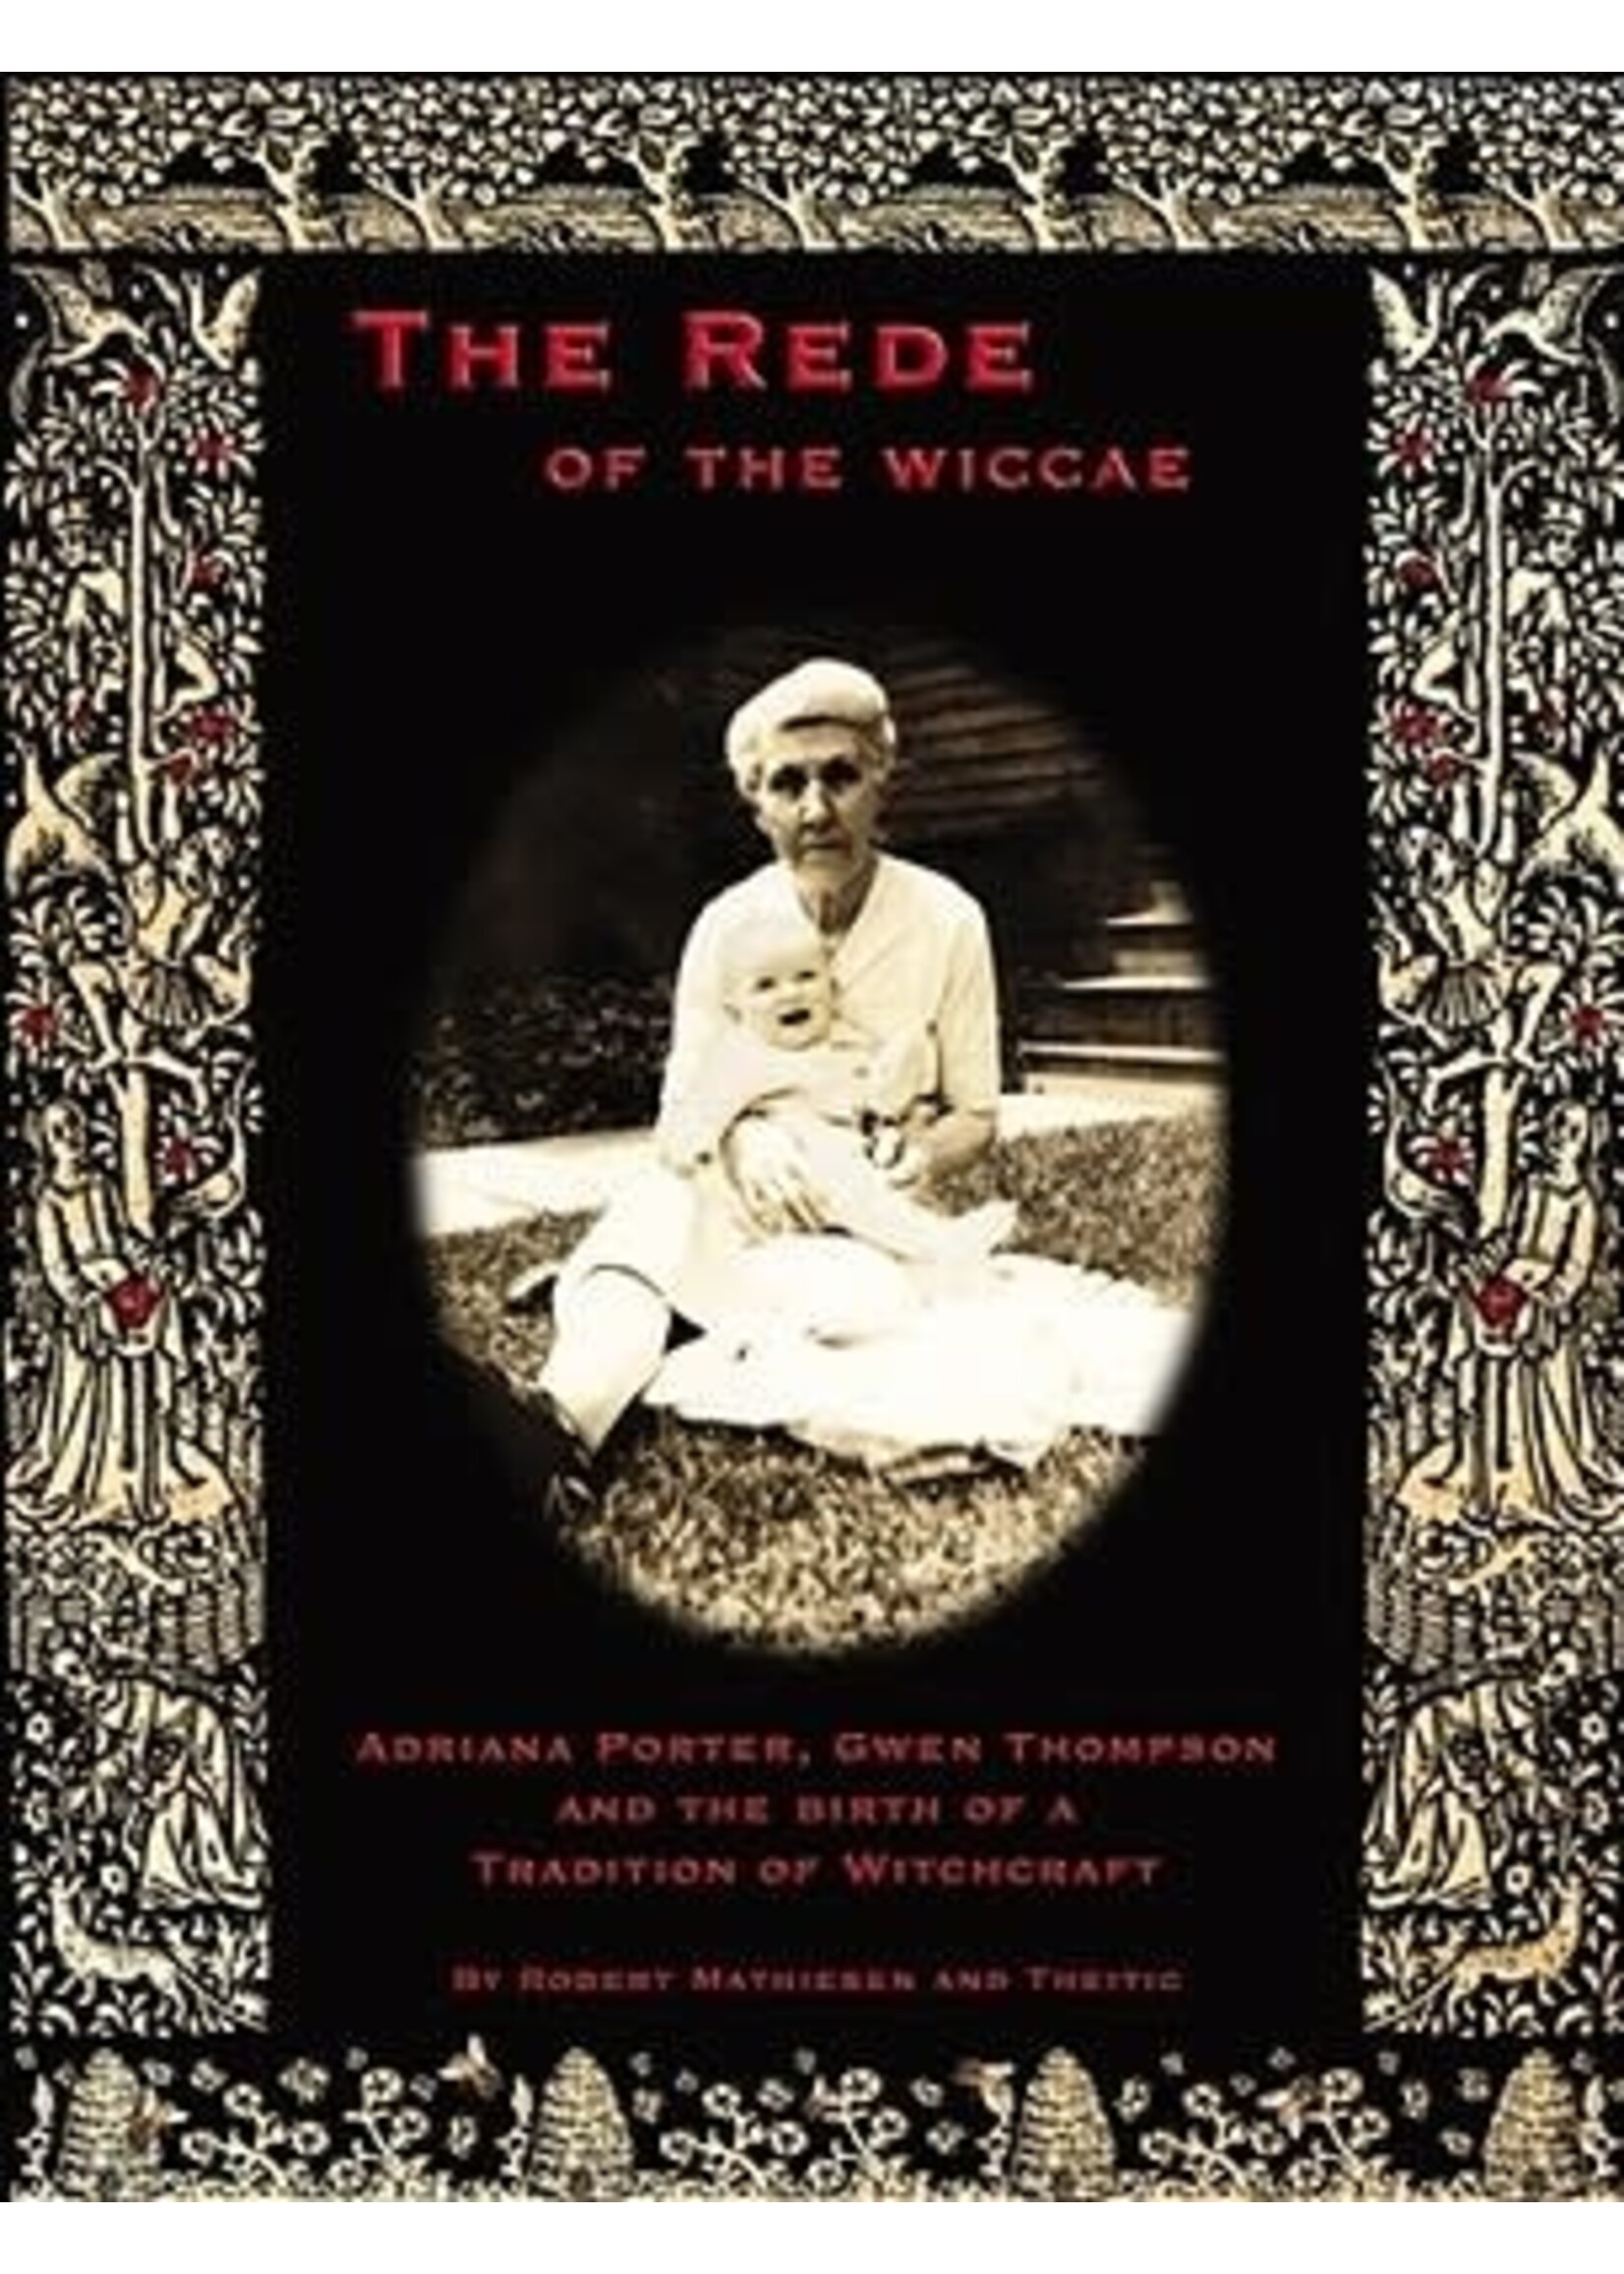 The Rede of the Wiccae by Adriana Porter, Gwen Thompson